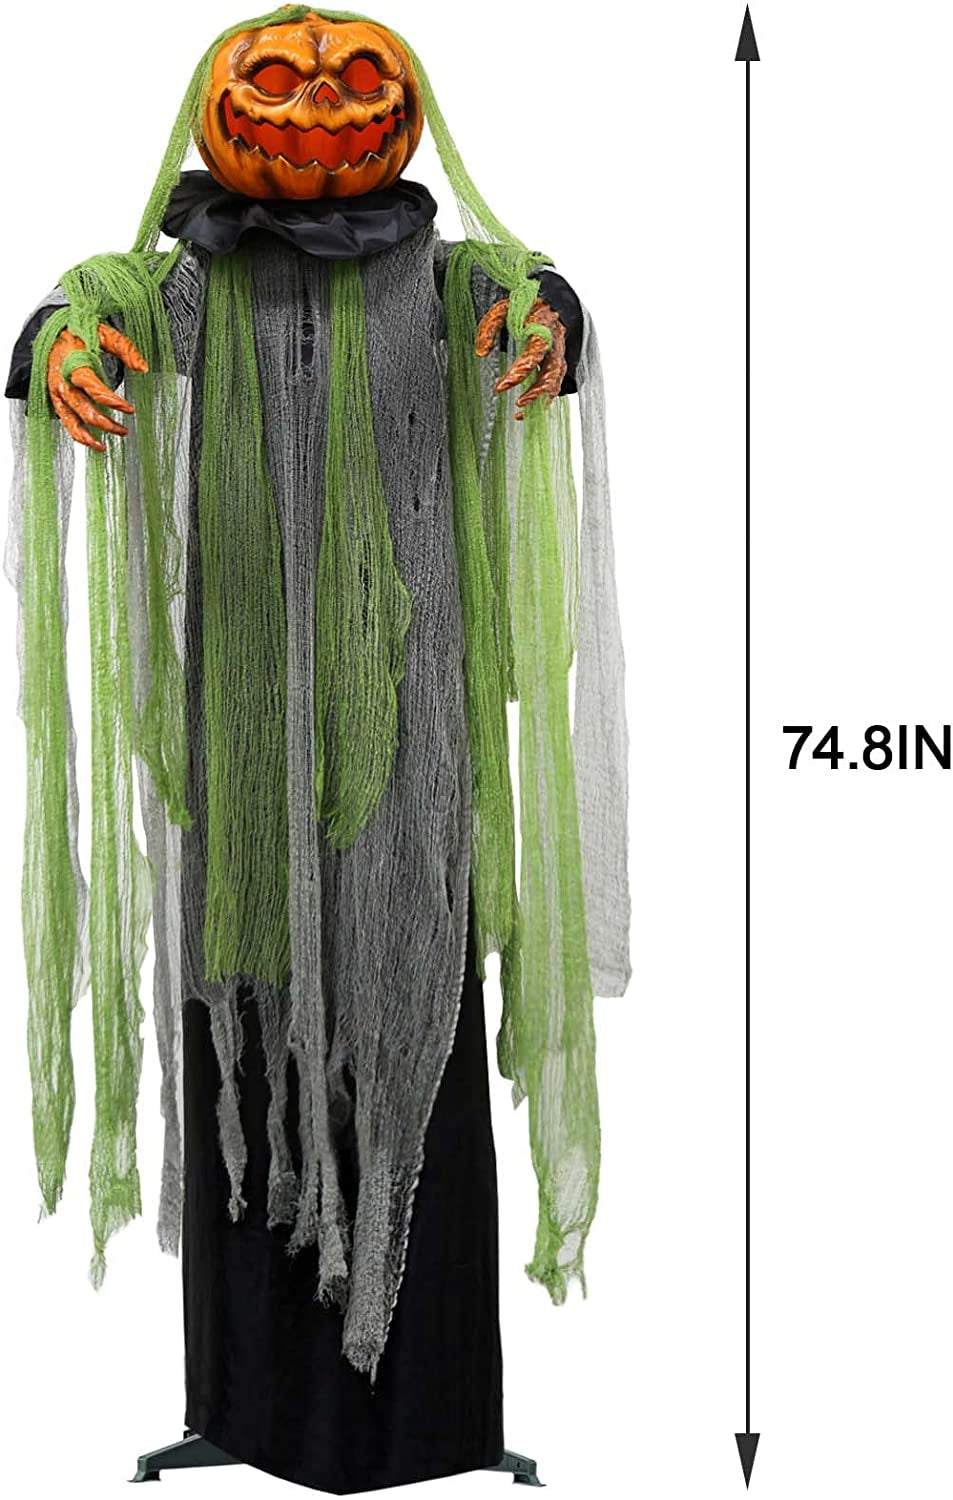 Halloween Decorations Outdoor - 6 Ft. Large Animated Root of Evil Prop with Spooky Sound - Sound & Touch Activated Sensor - Animatronic Scary Props Decor for Home Party Indoor outside Yard Decoration